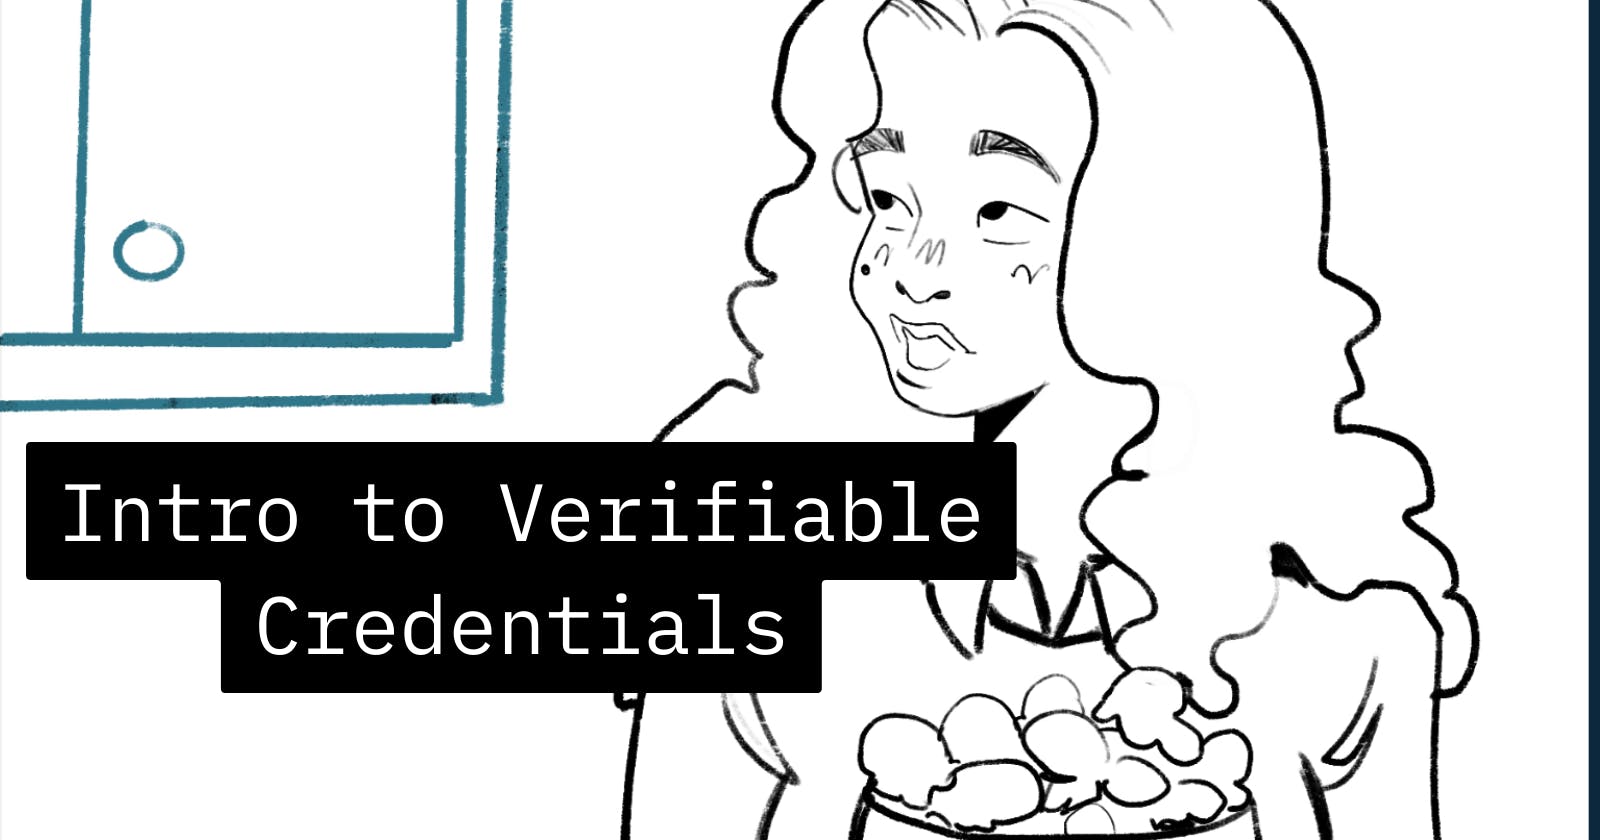 A Beginner-Friendly Illustrated Guide to Verifiable Credentials